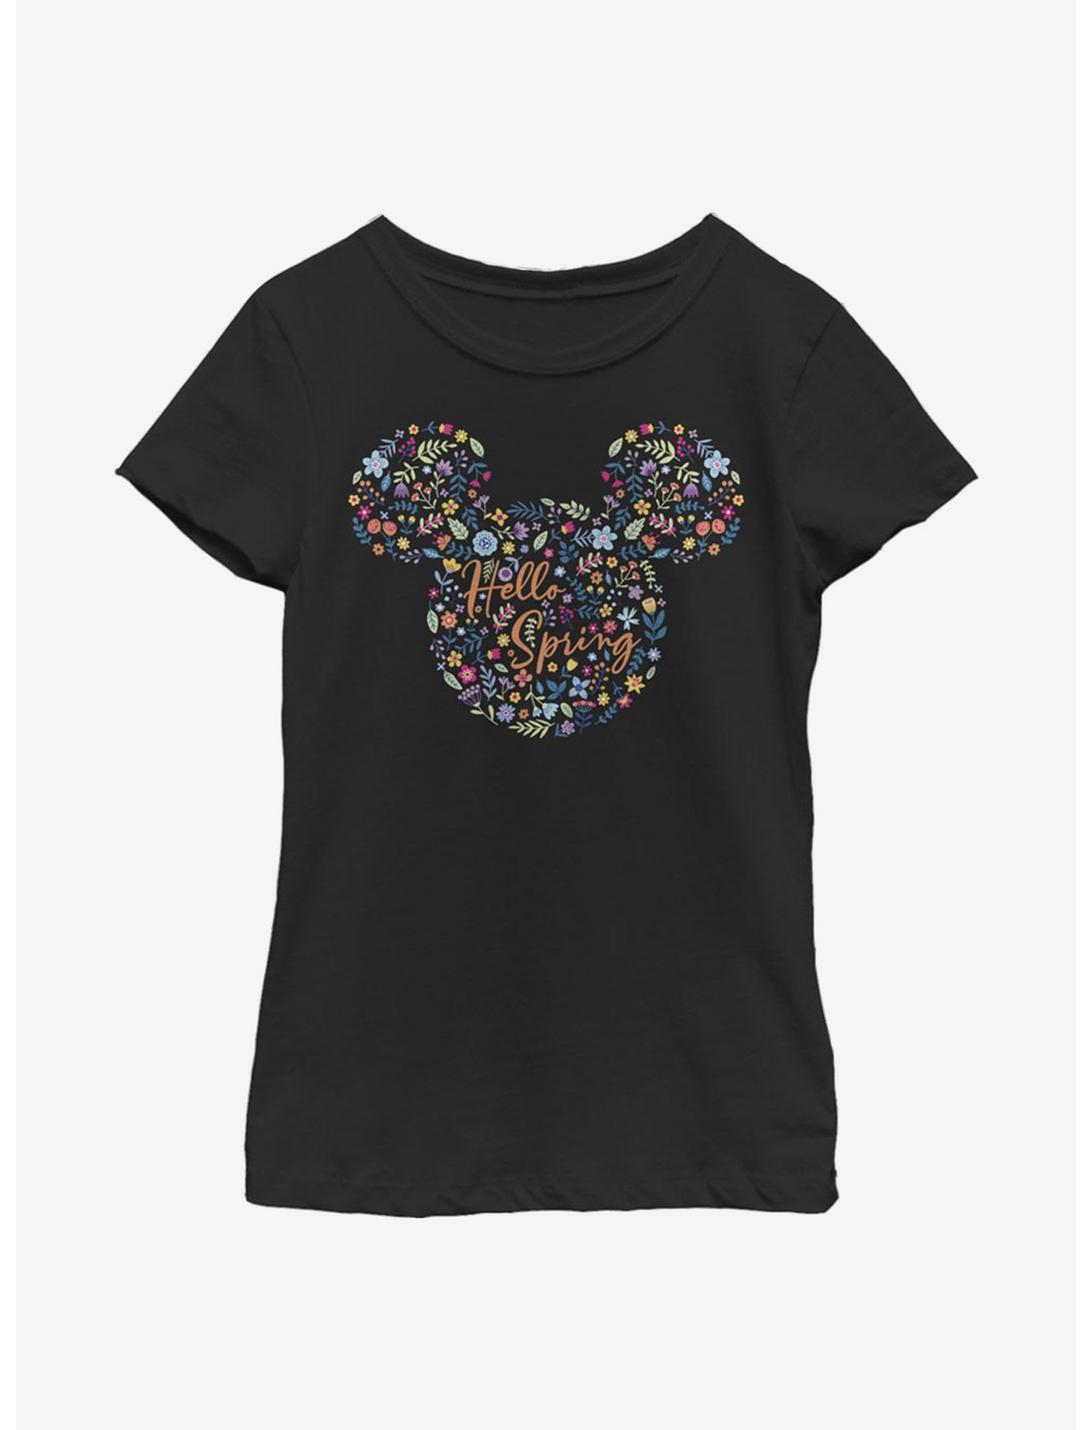 Disney Mickey Mouse Floral Ears Youth Girls T-Shirt, BLACK, hi-res